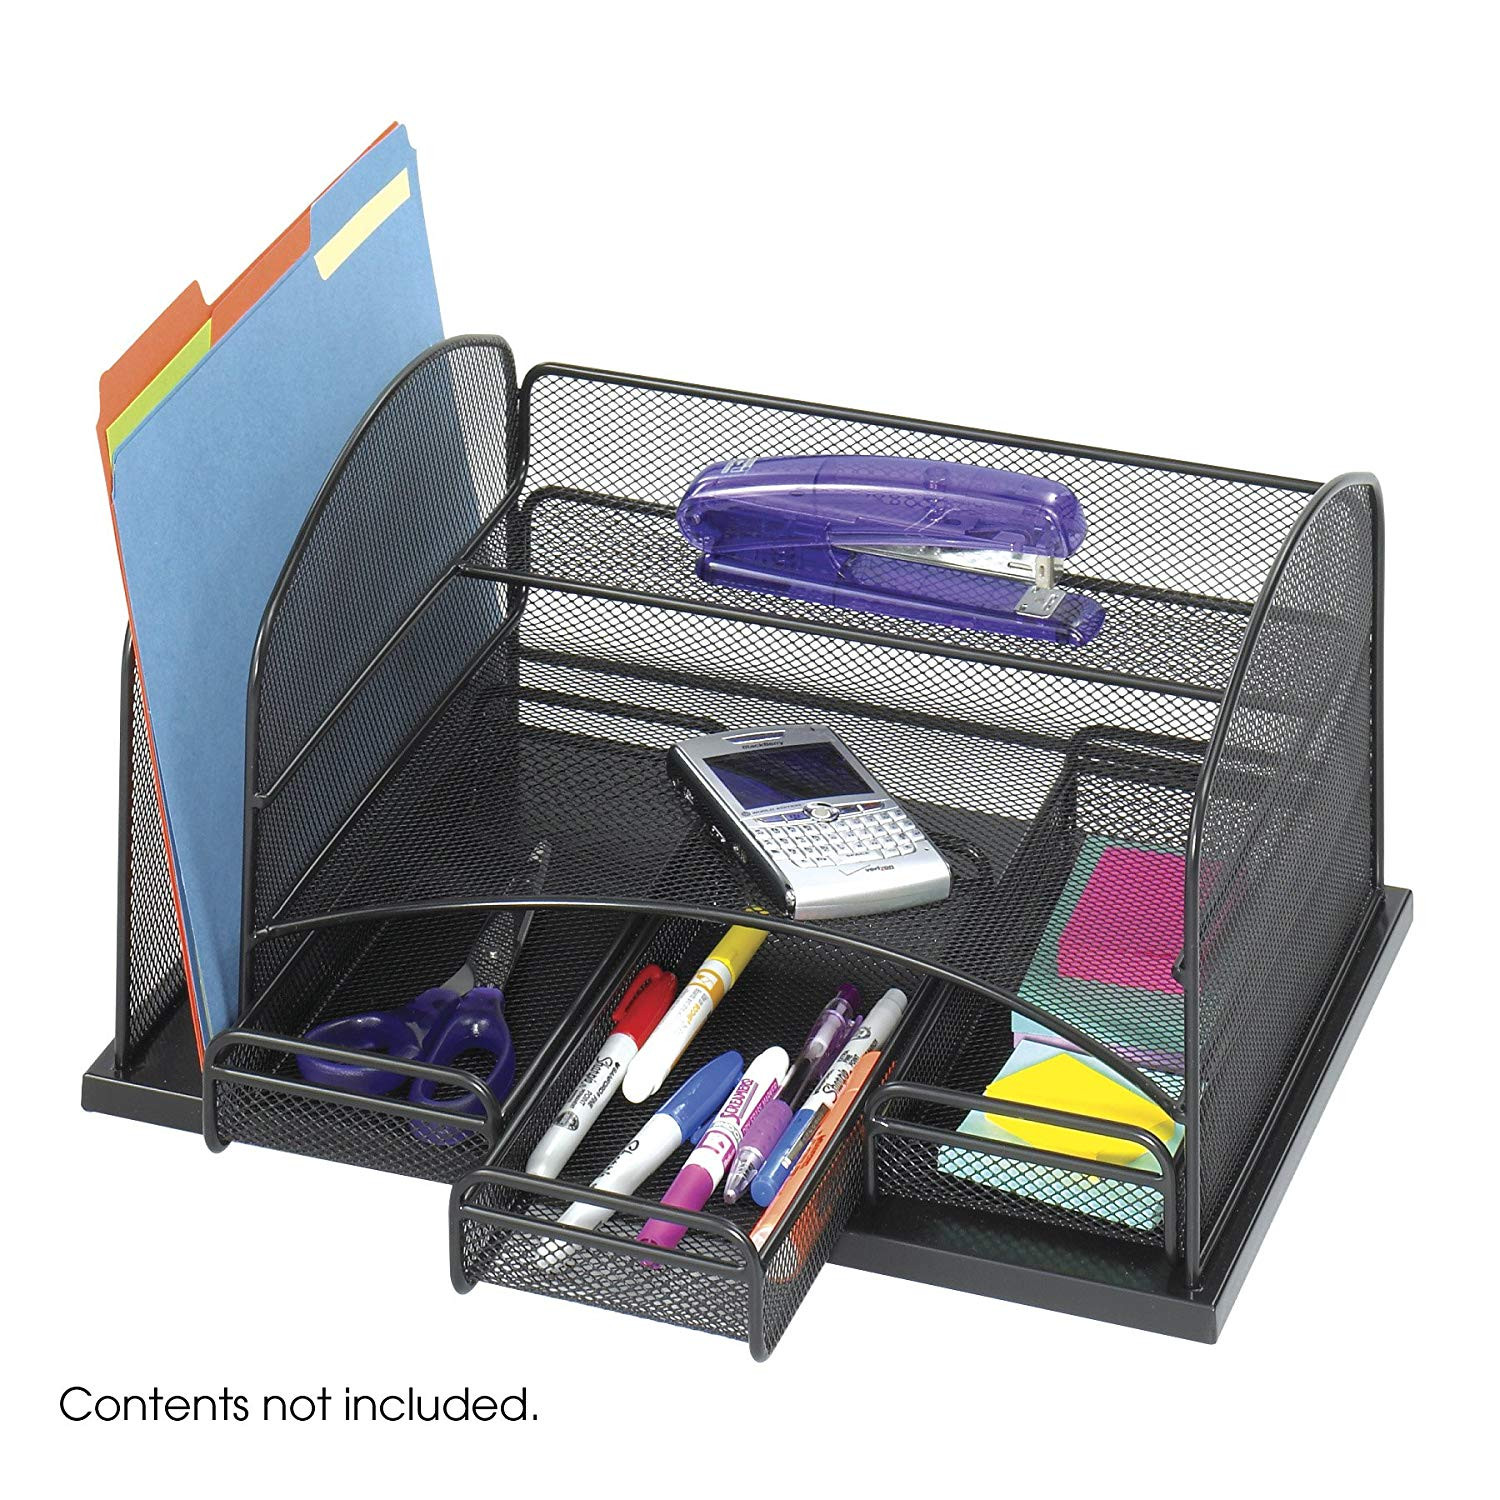 Desk organizer with Drawers Fresh Safco Products Yx Mesh Desk organizer with 3 Drawers